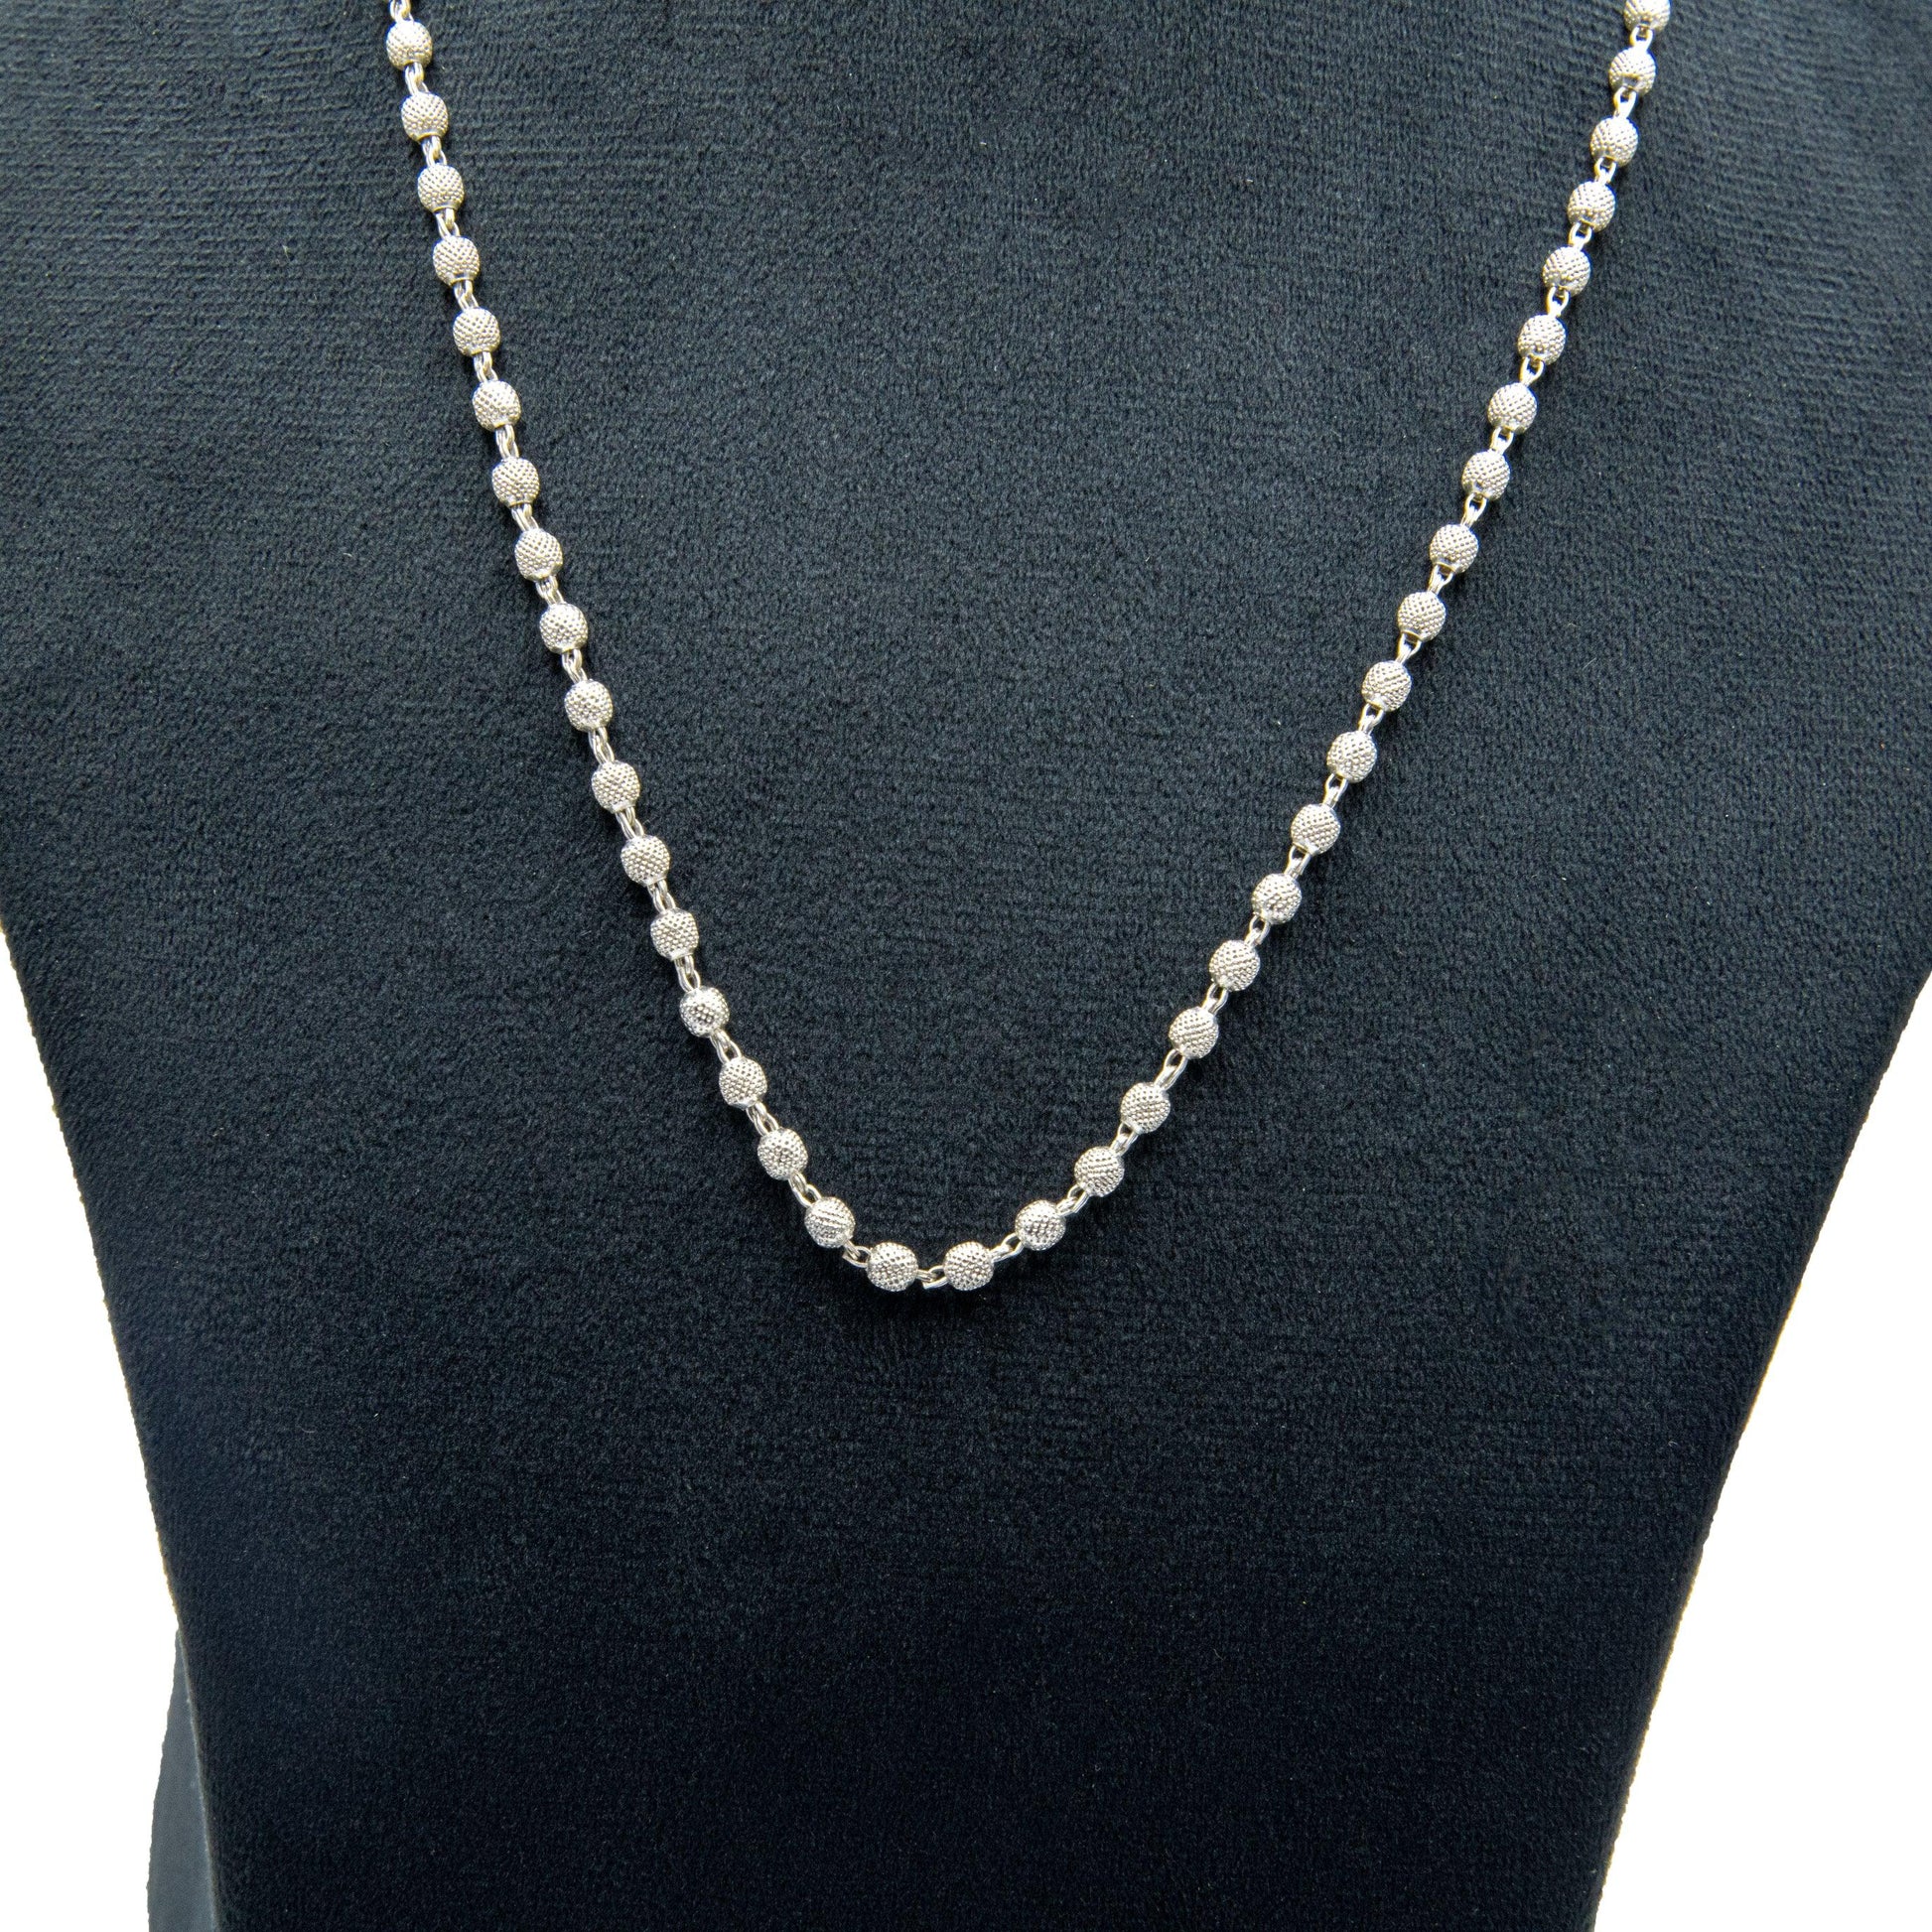 Peppercorn Texture Silver Plated Beads Necklace - DeKulture DKW-1490-SLC